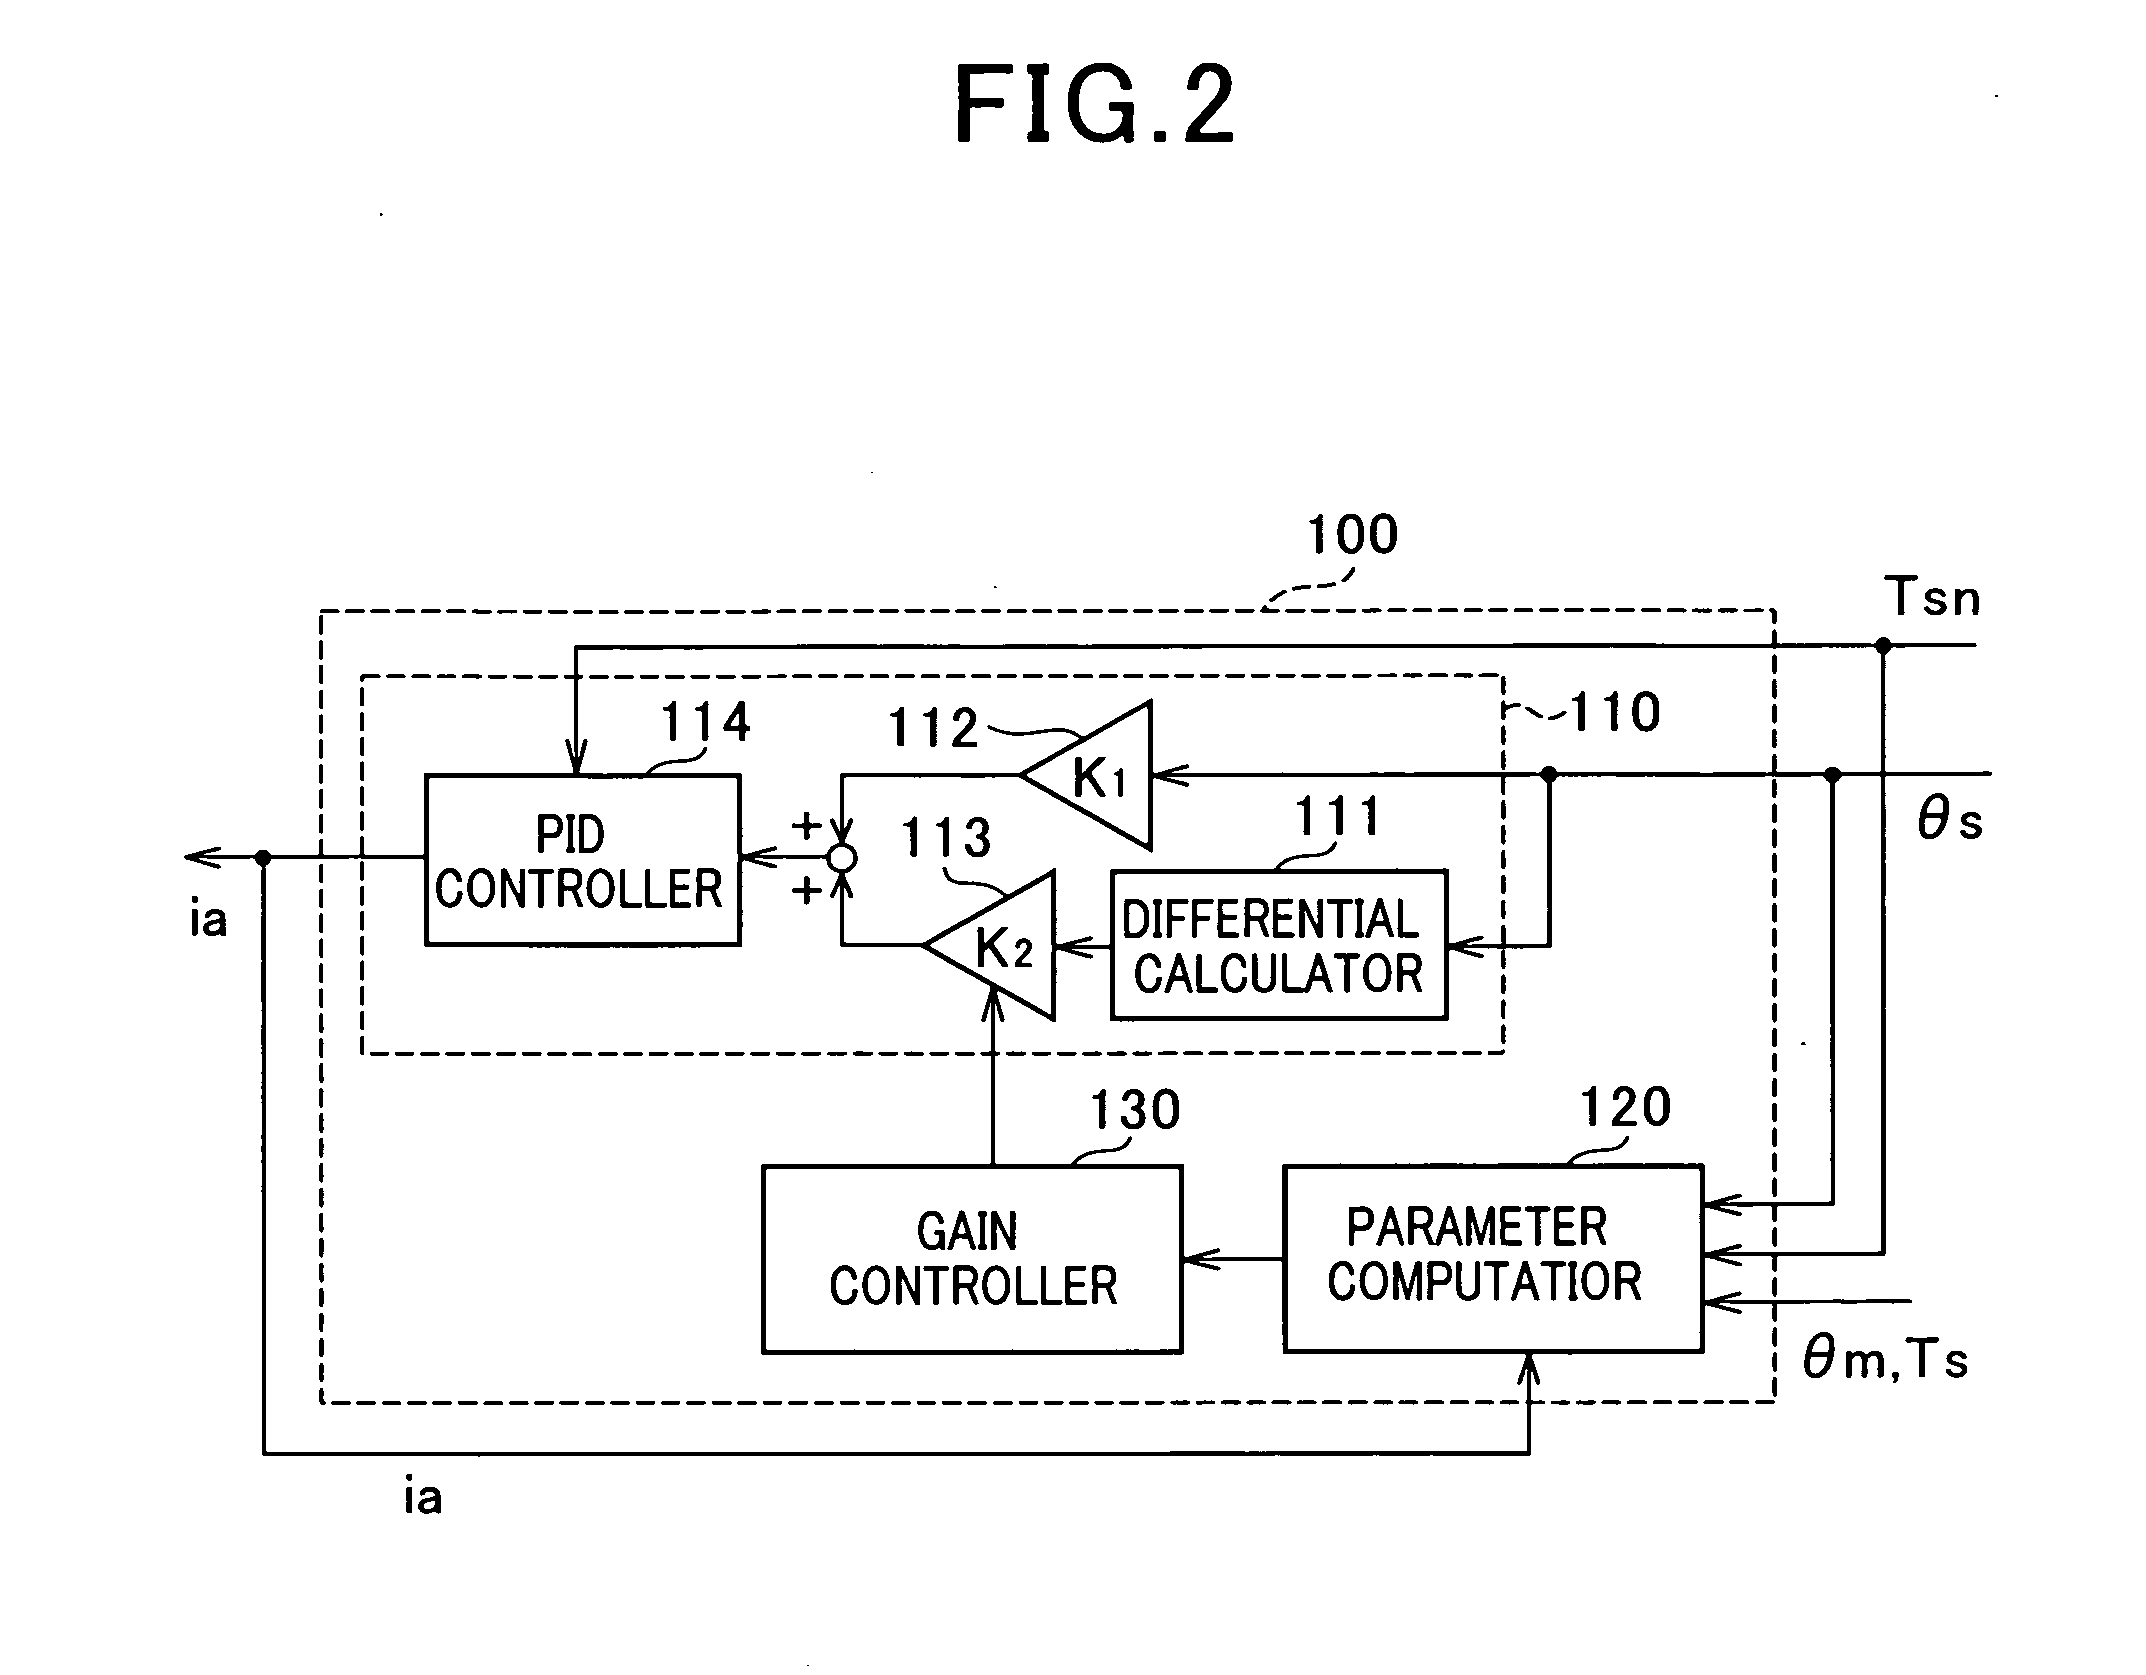 Control apparatus for electric power steering system